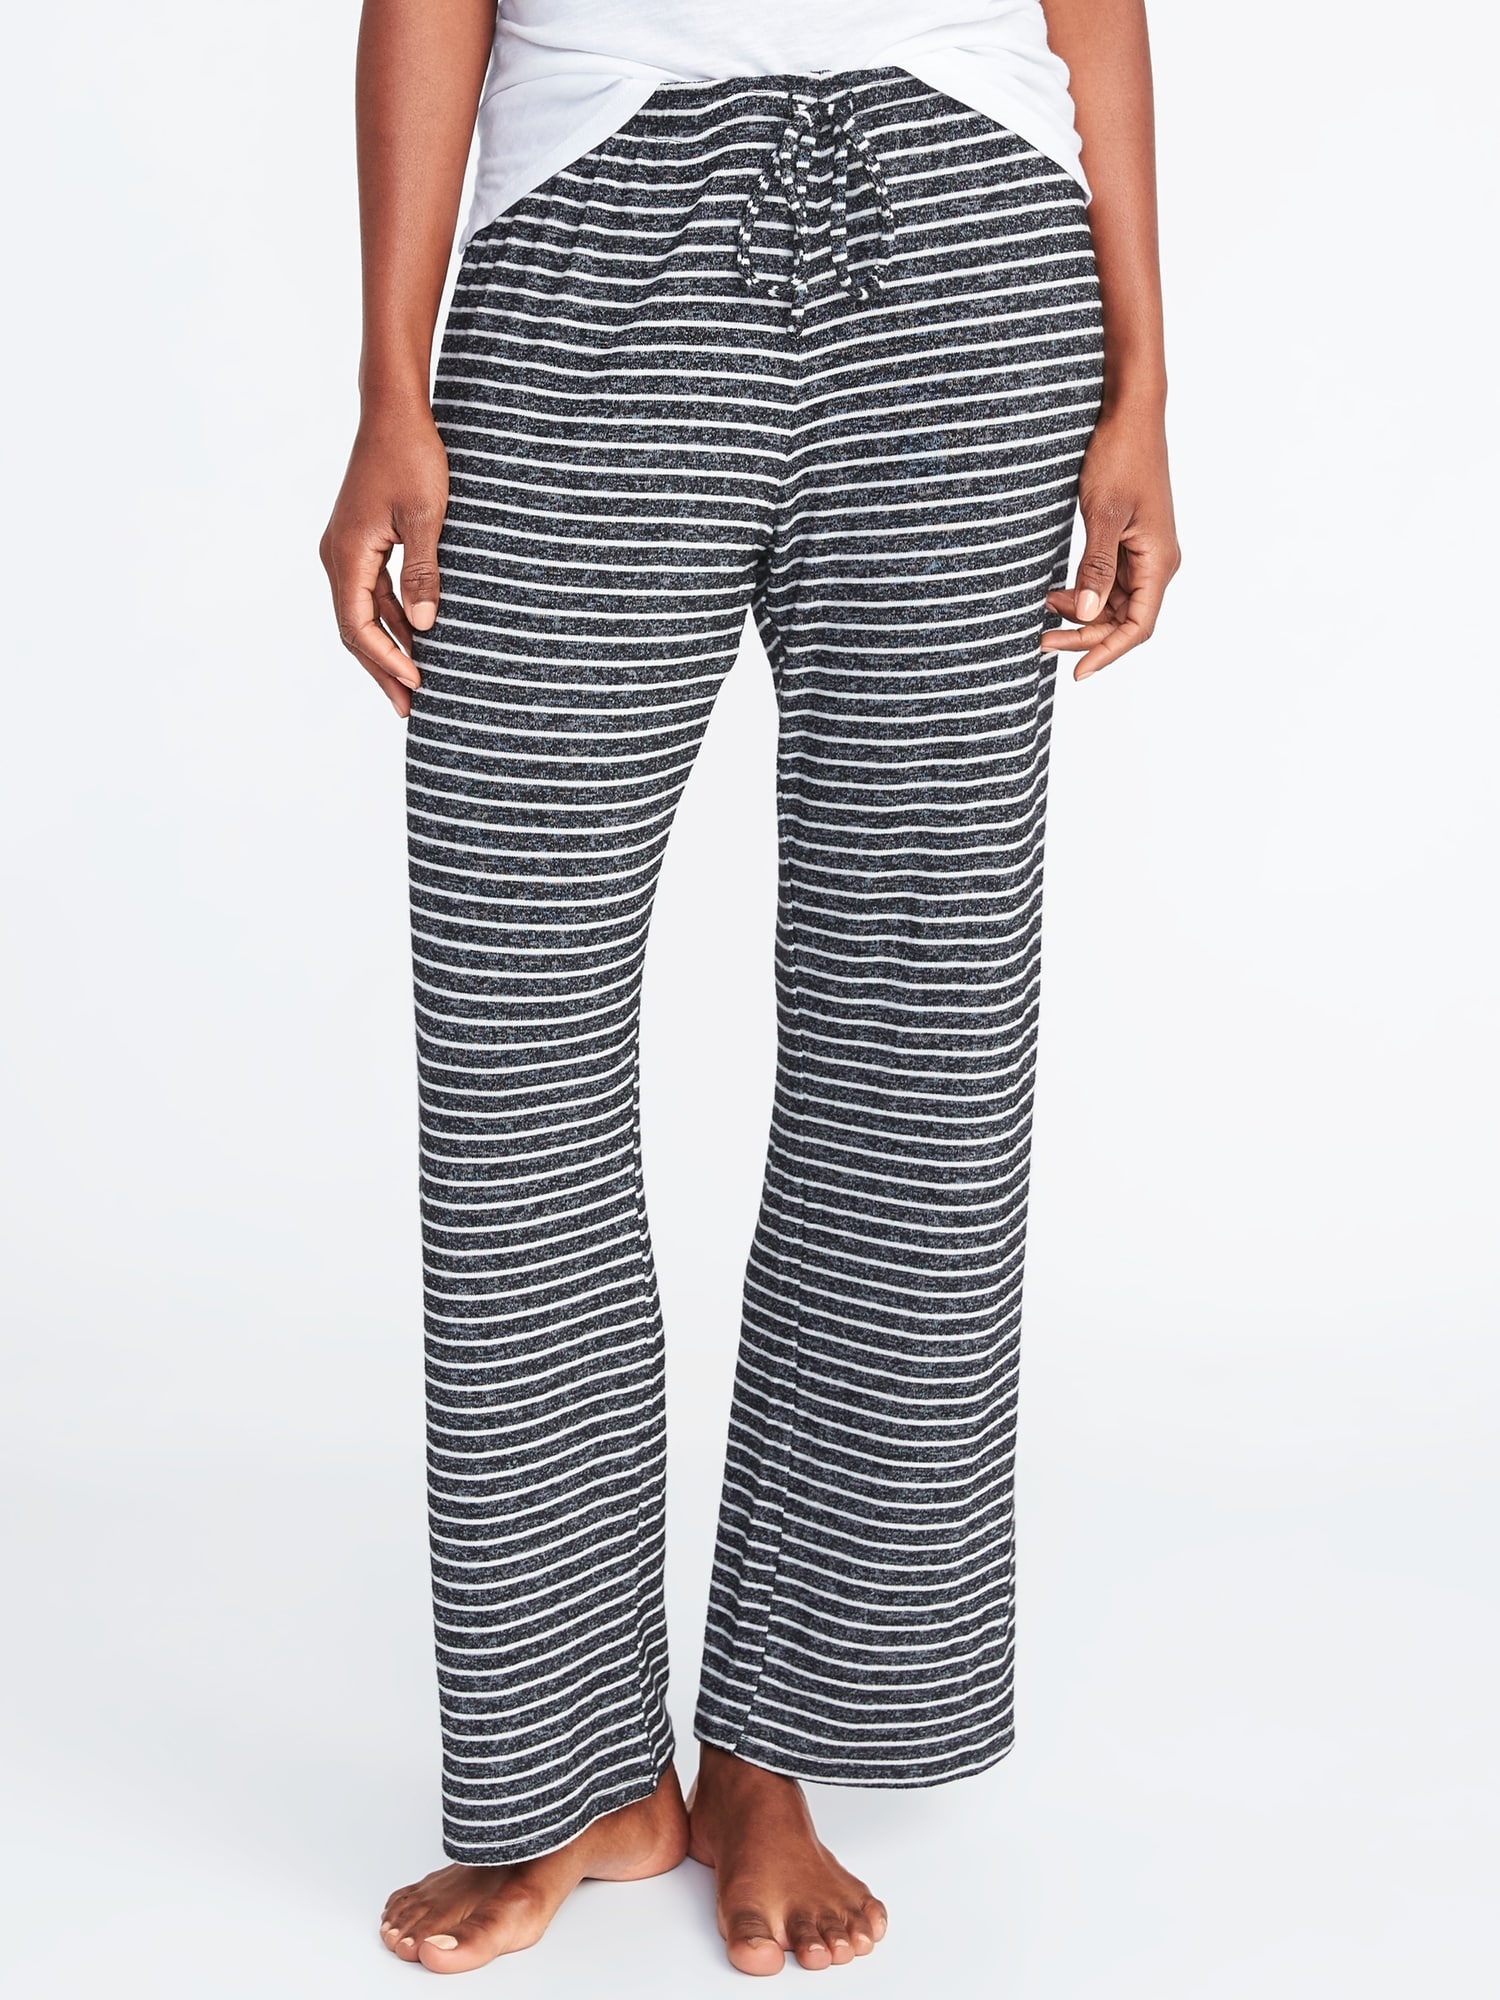 Old Navy Knit Pajama Pants for Women